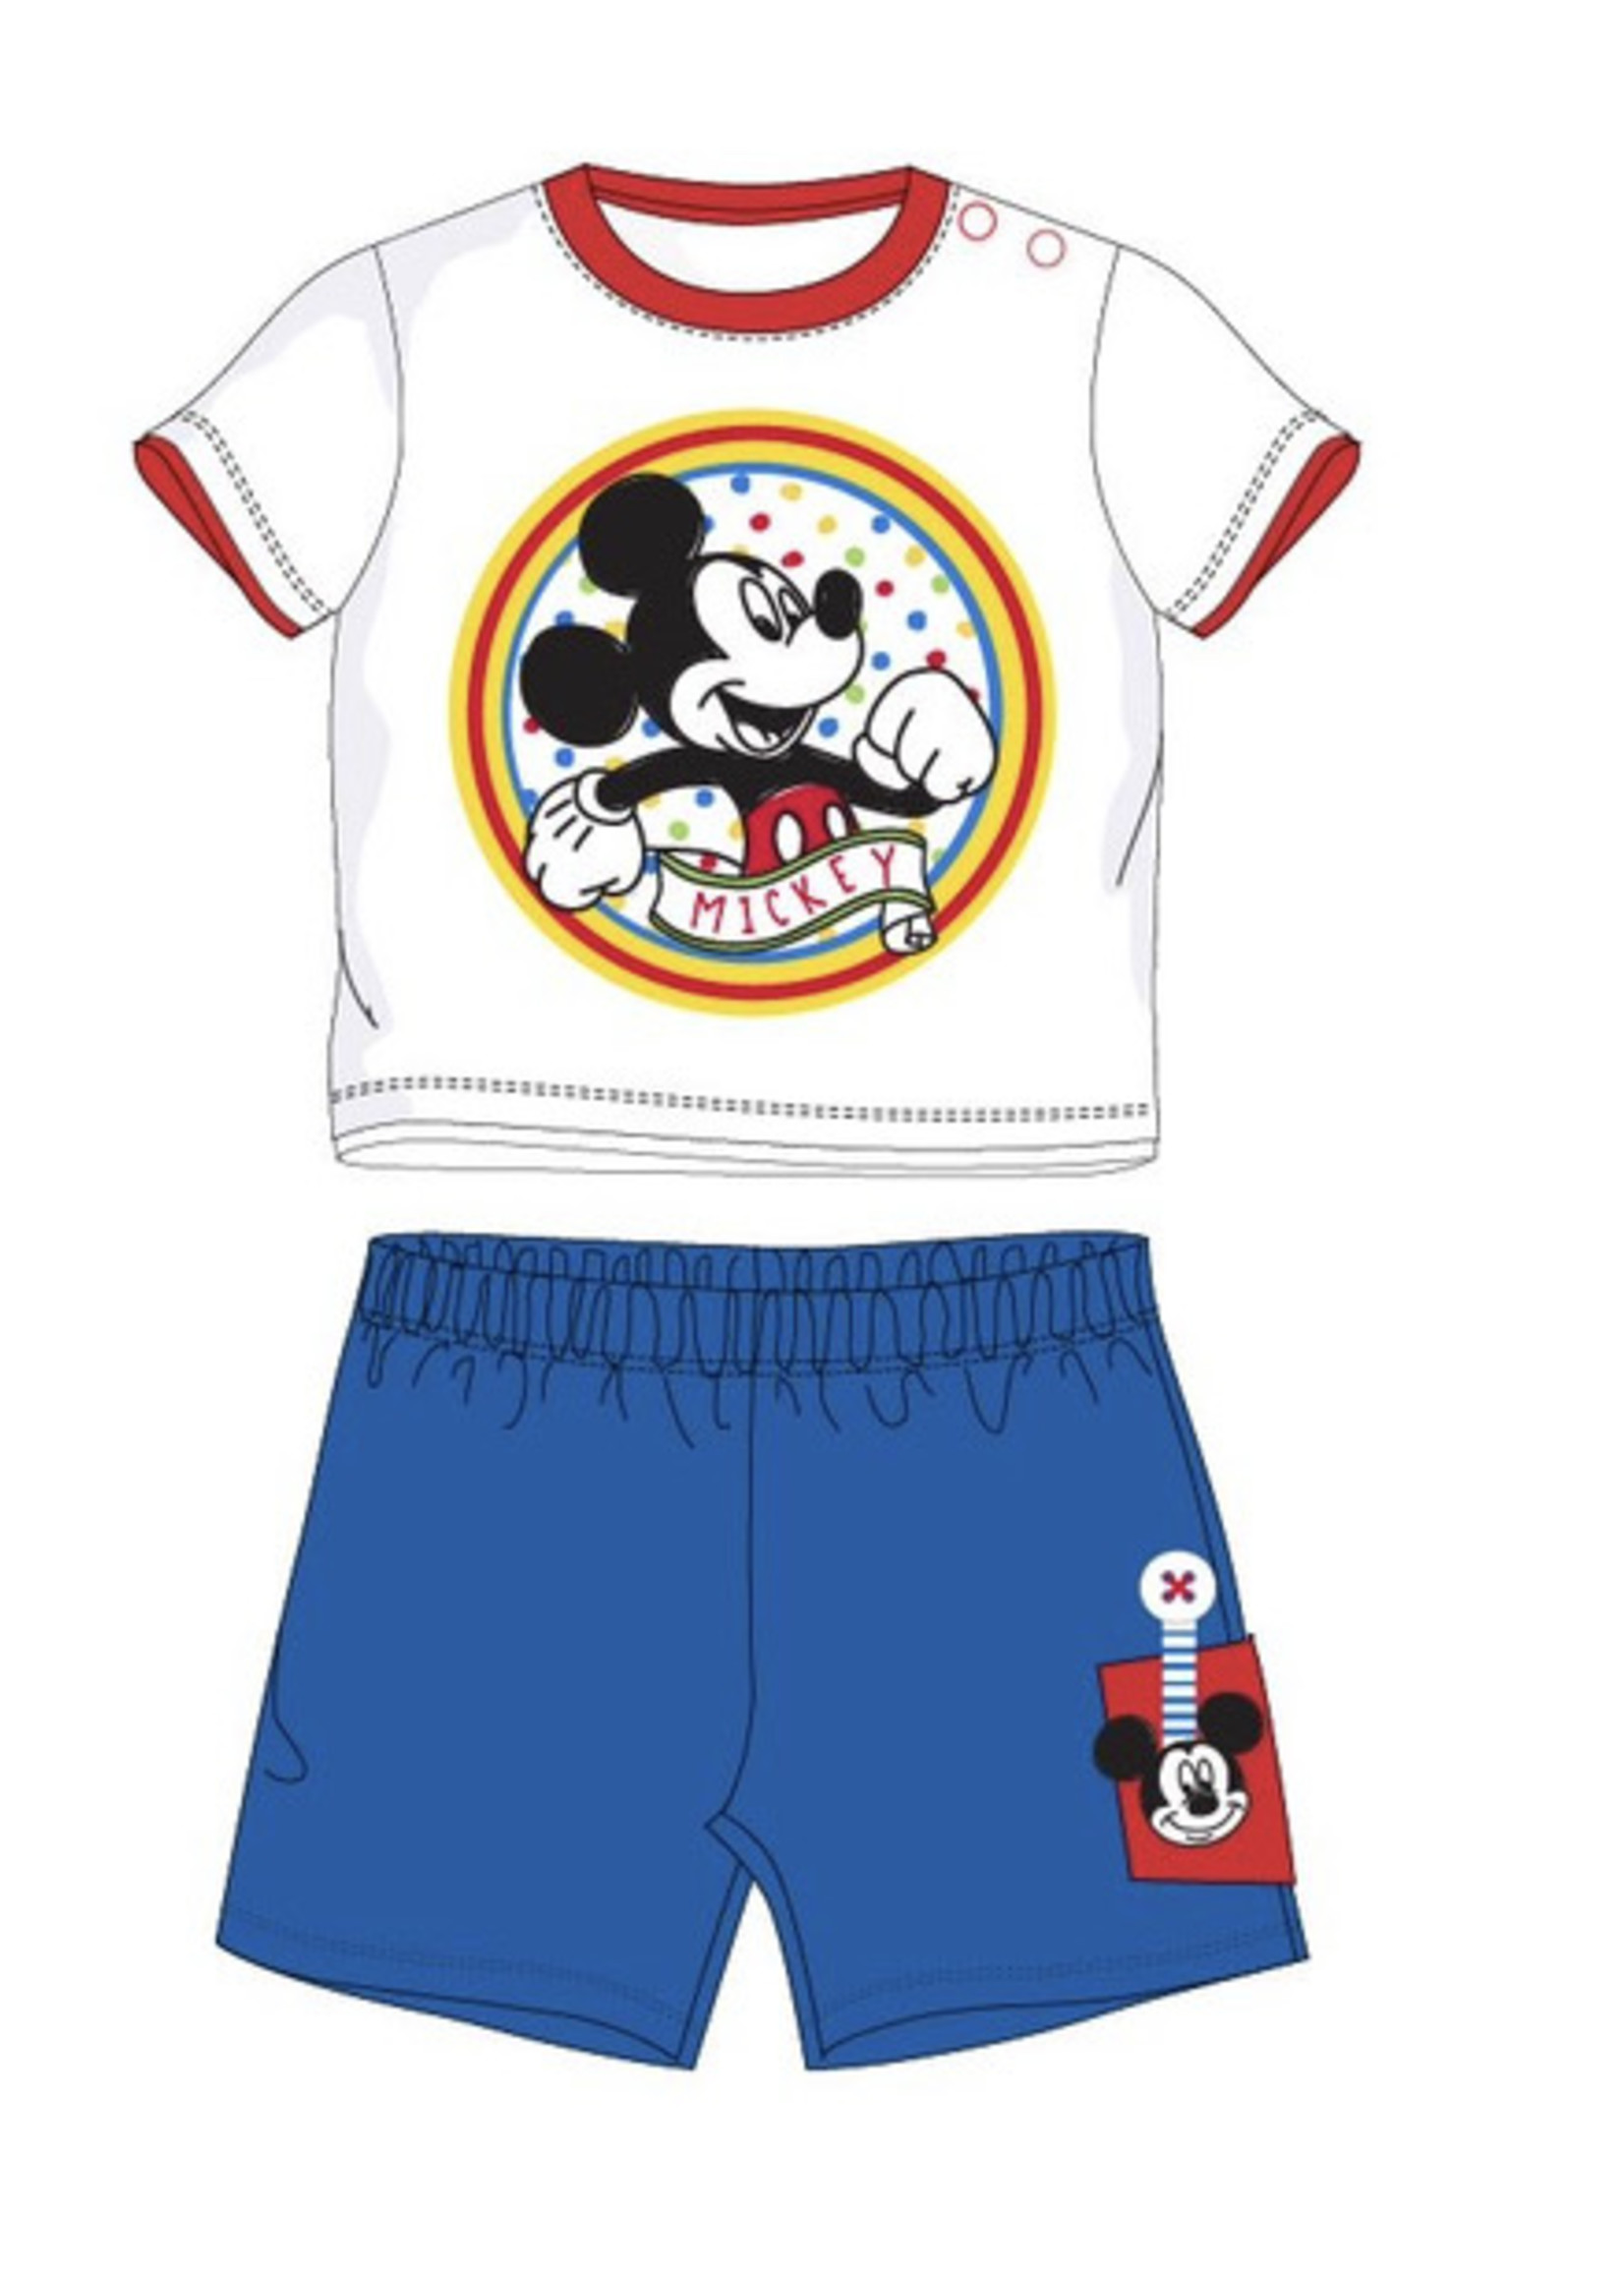 Disney baby Mickey Mouse summer set from Disney baby blue